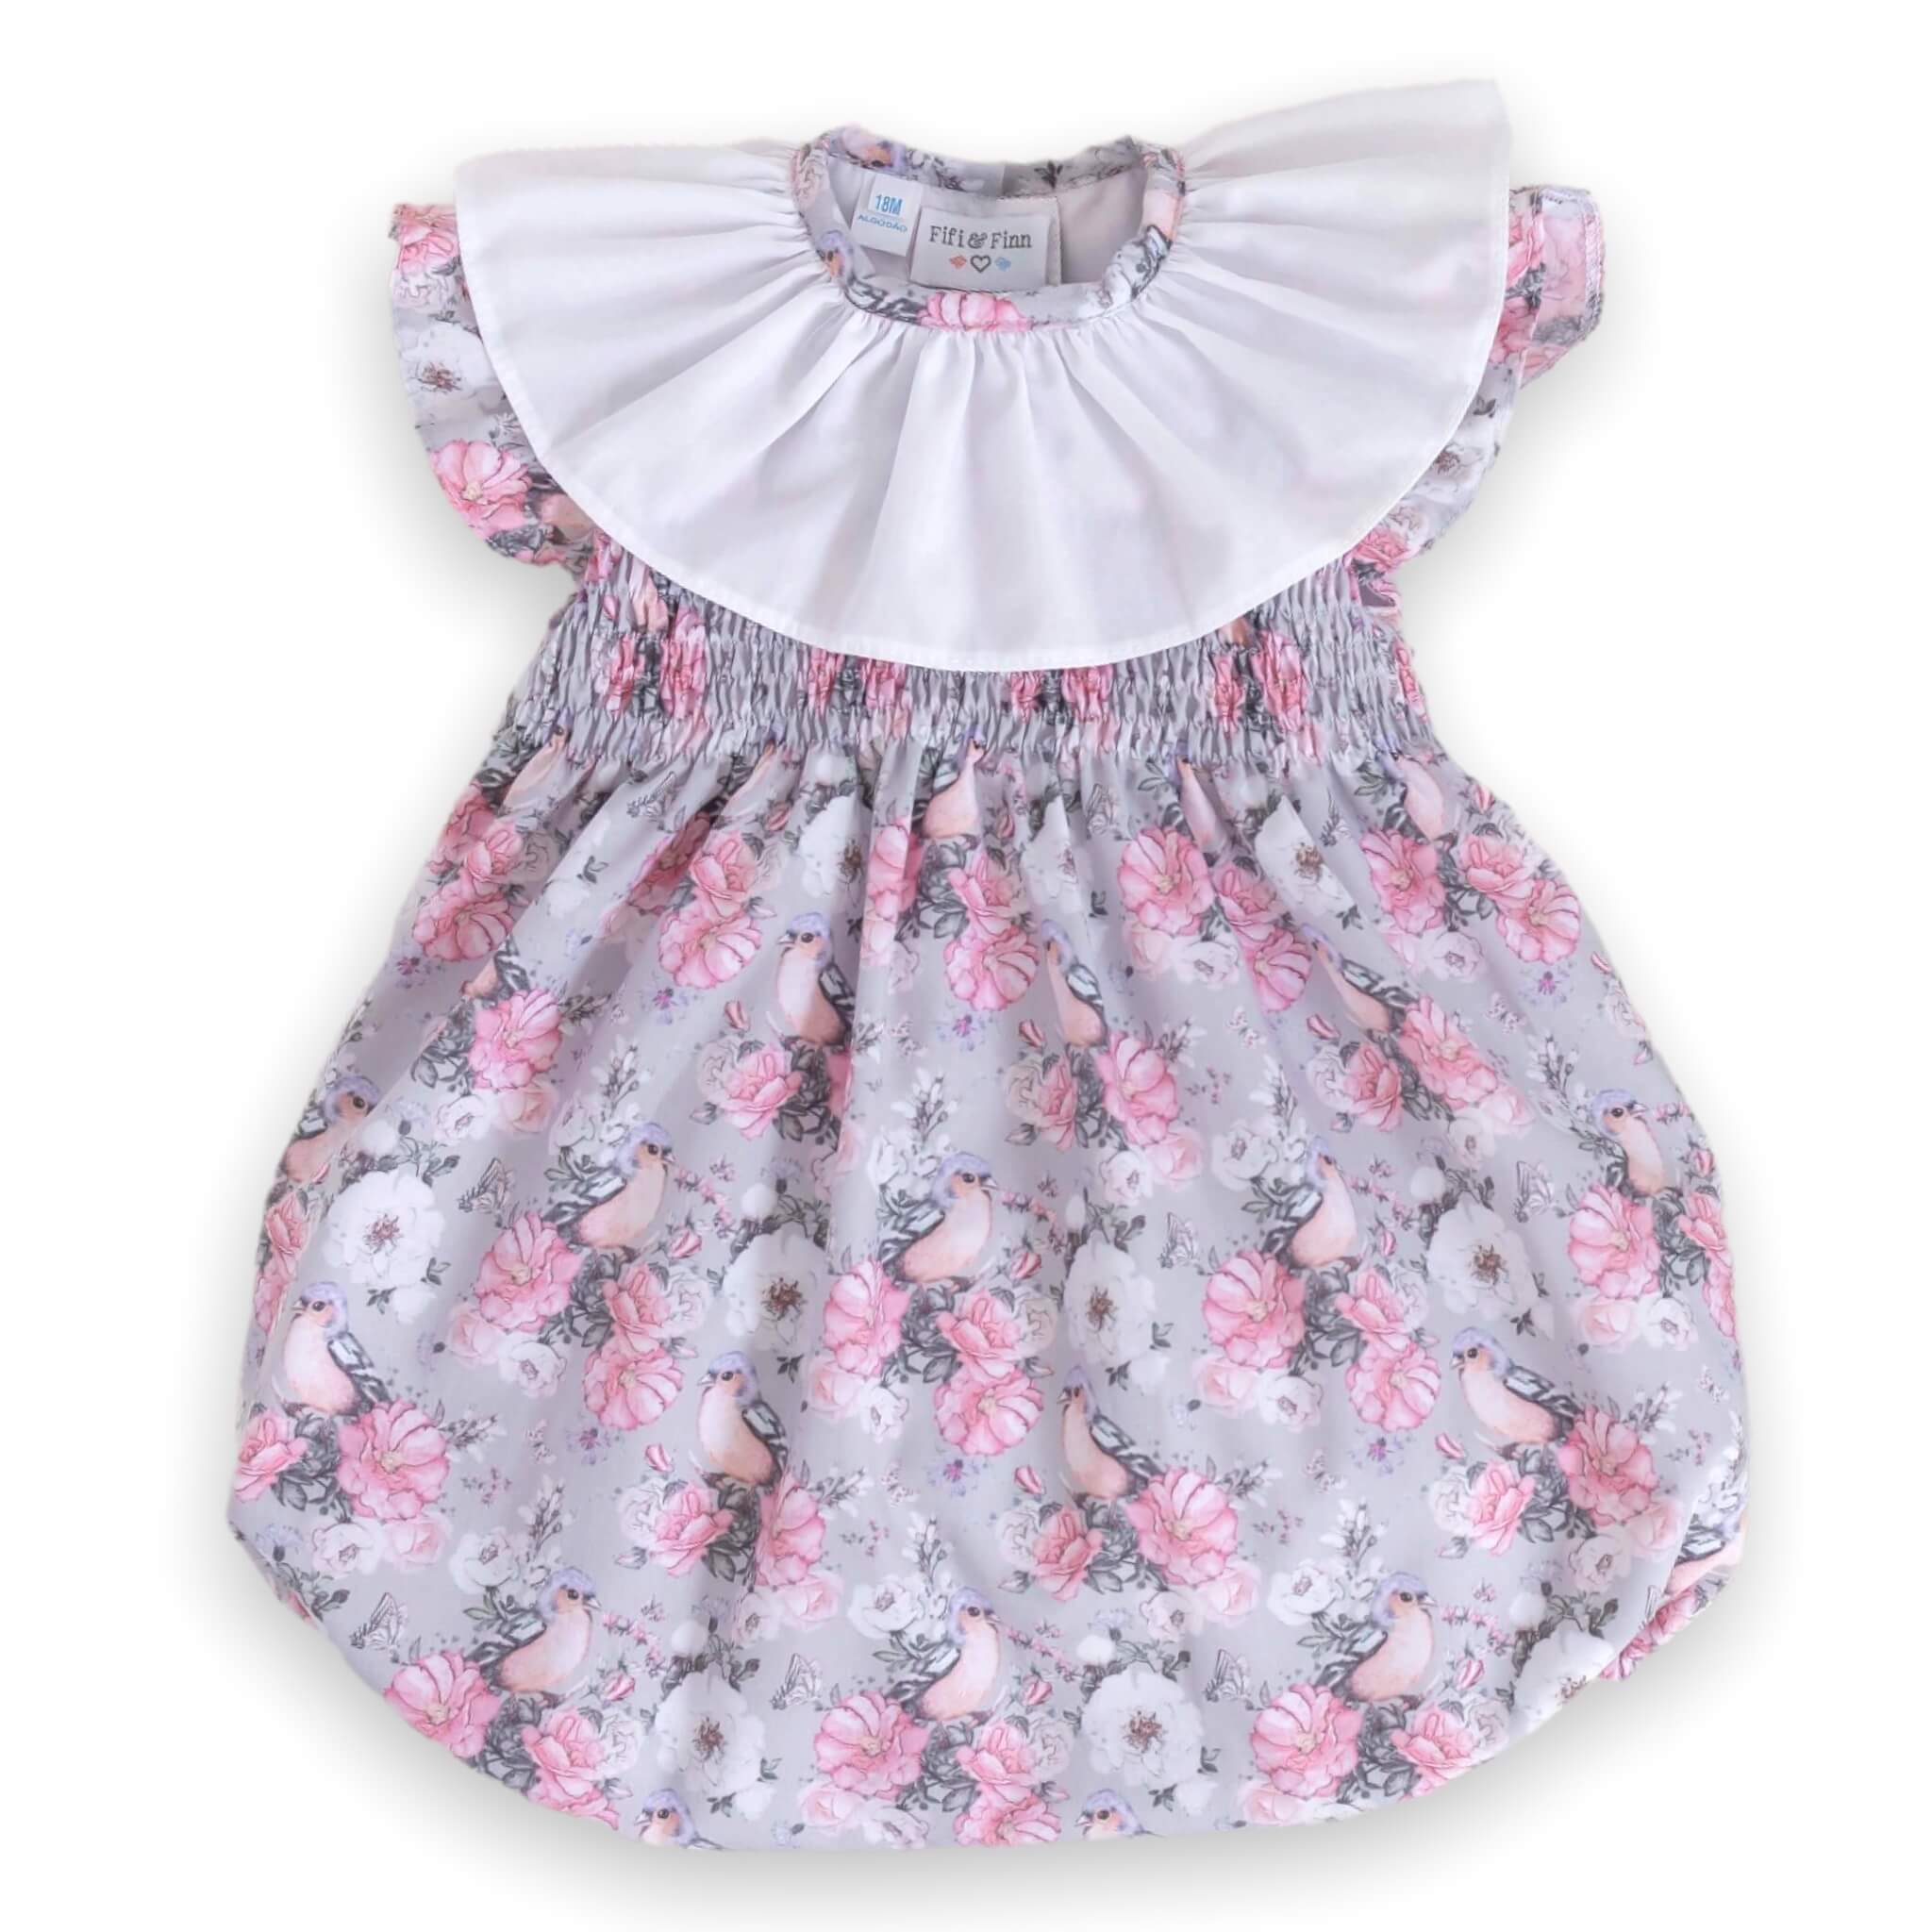 floral classic smocked baby girl romper